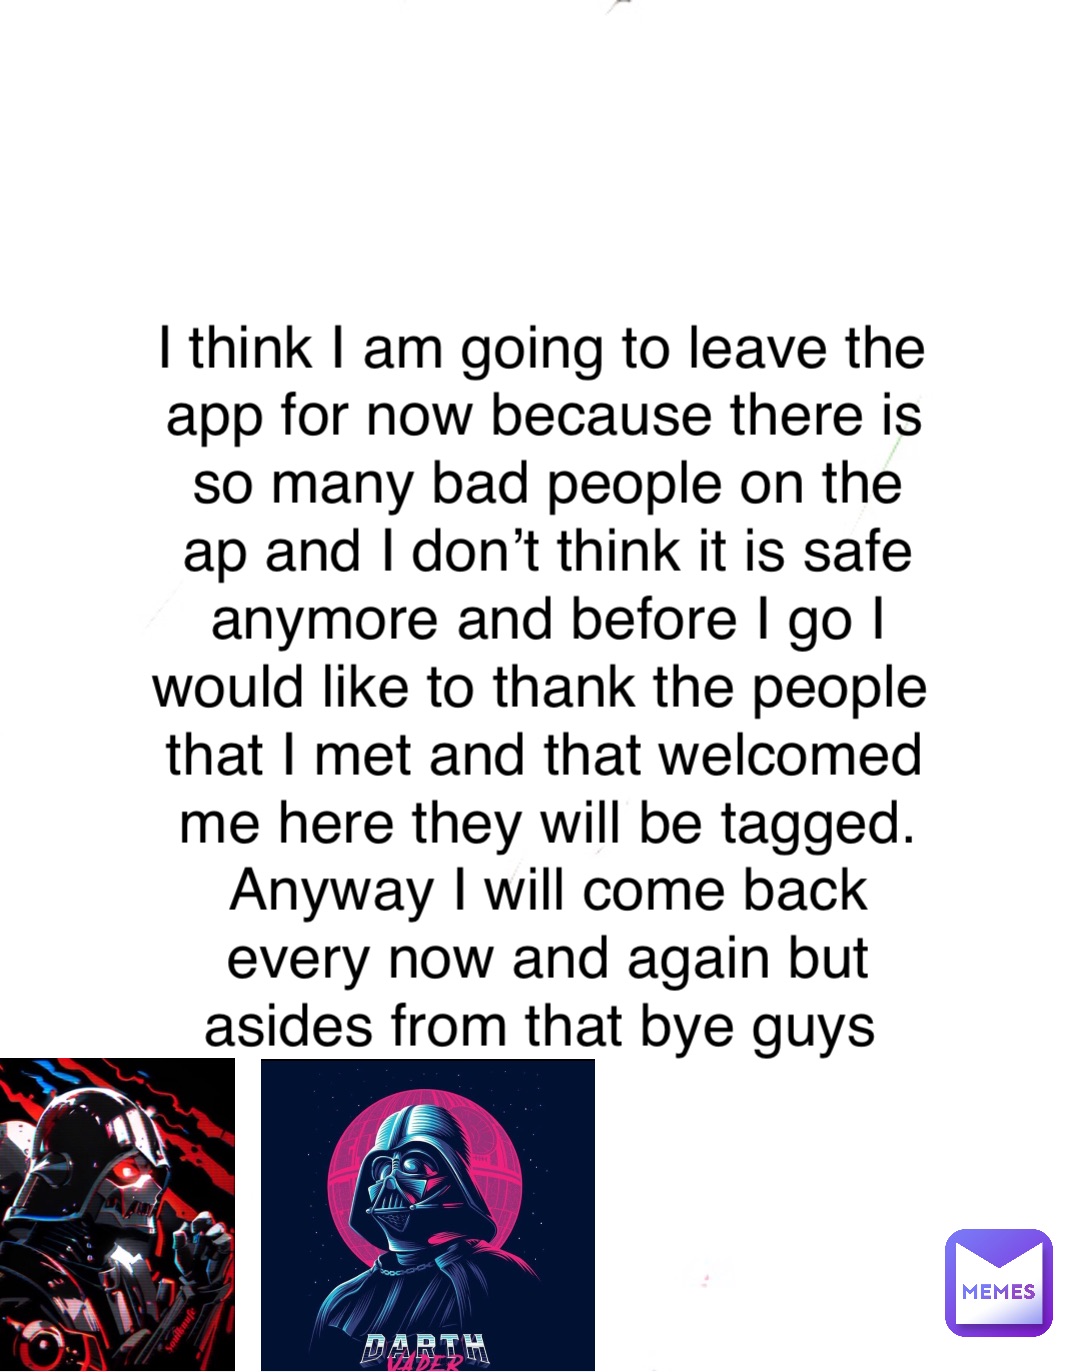 I think I am going to leave the app for now because there is so many bad people on the ap and I don’t think it is safe anymore and before I go I would like to thank the people that I met and that welcomed me here they will be tagged. Anyway I will come back every now and again but asides from that bye guys